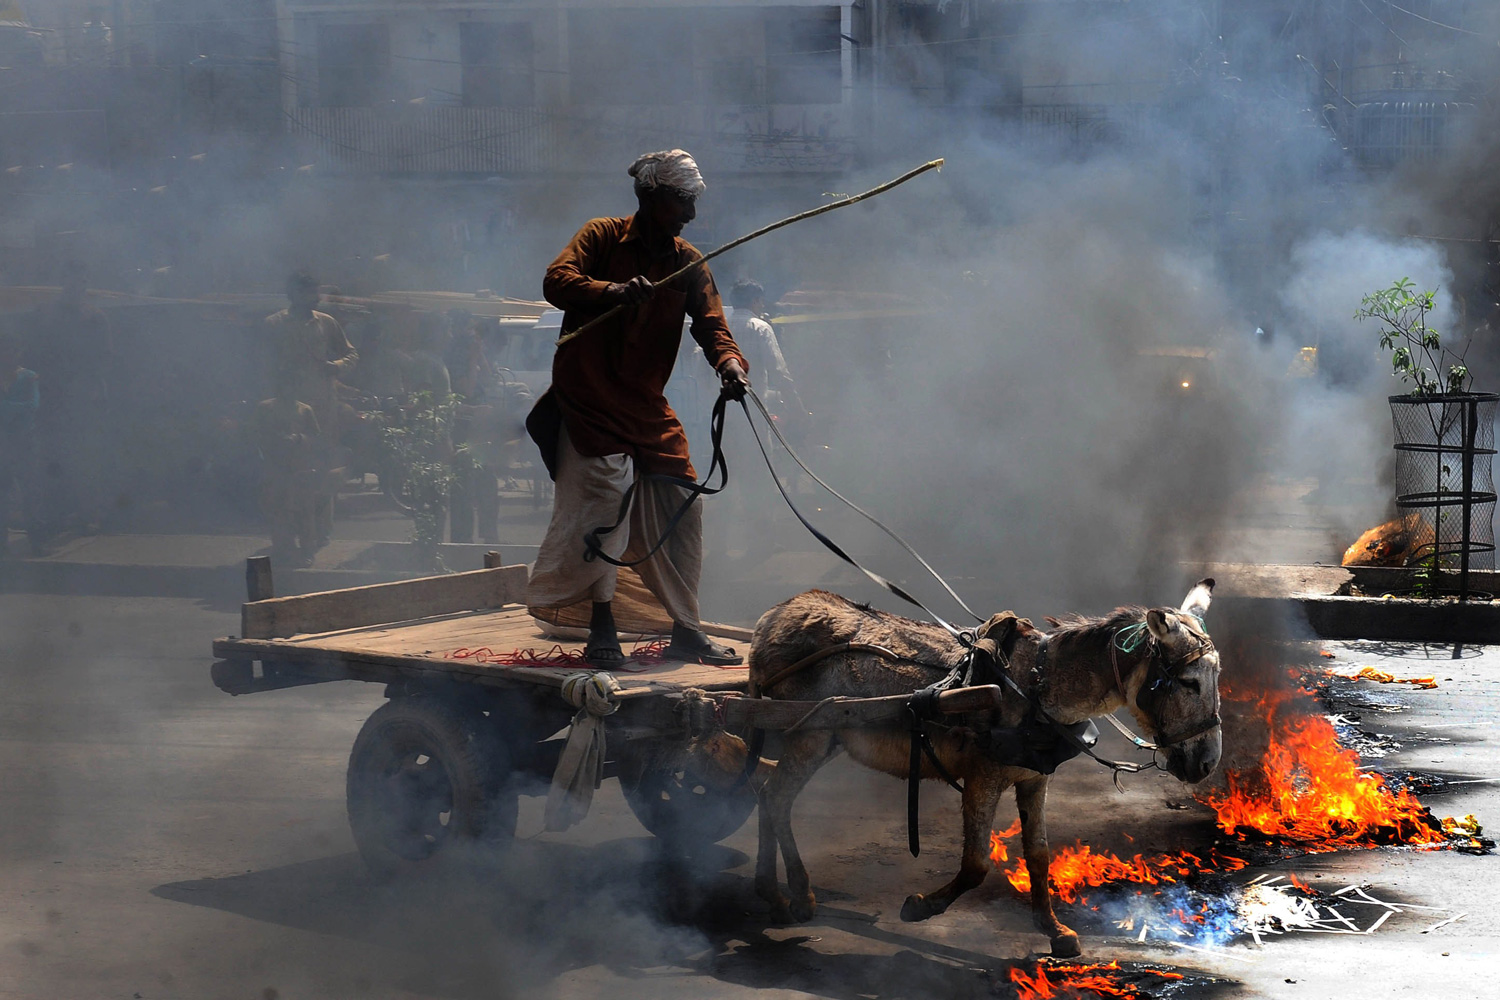 March 28, 2012. A Pakistani man rides his donkey cart on burning tires during a protest rally in Lahore, Pakistan, against widespread electricity shortages in the country.